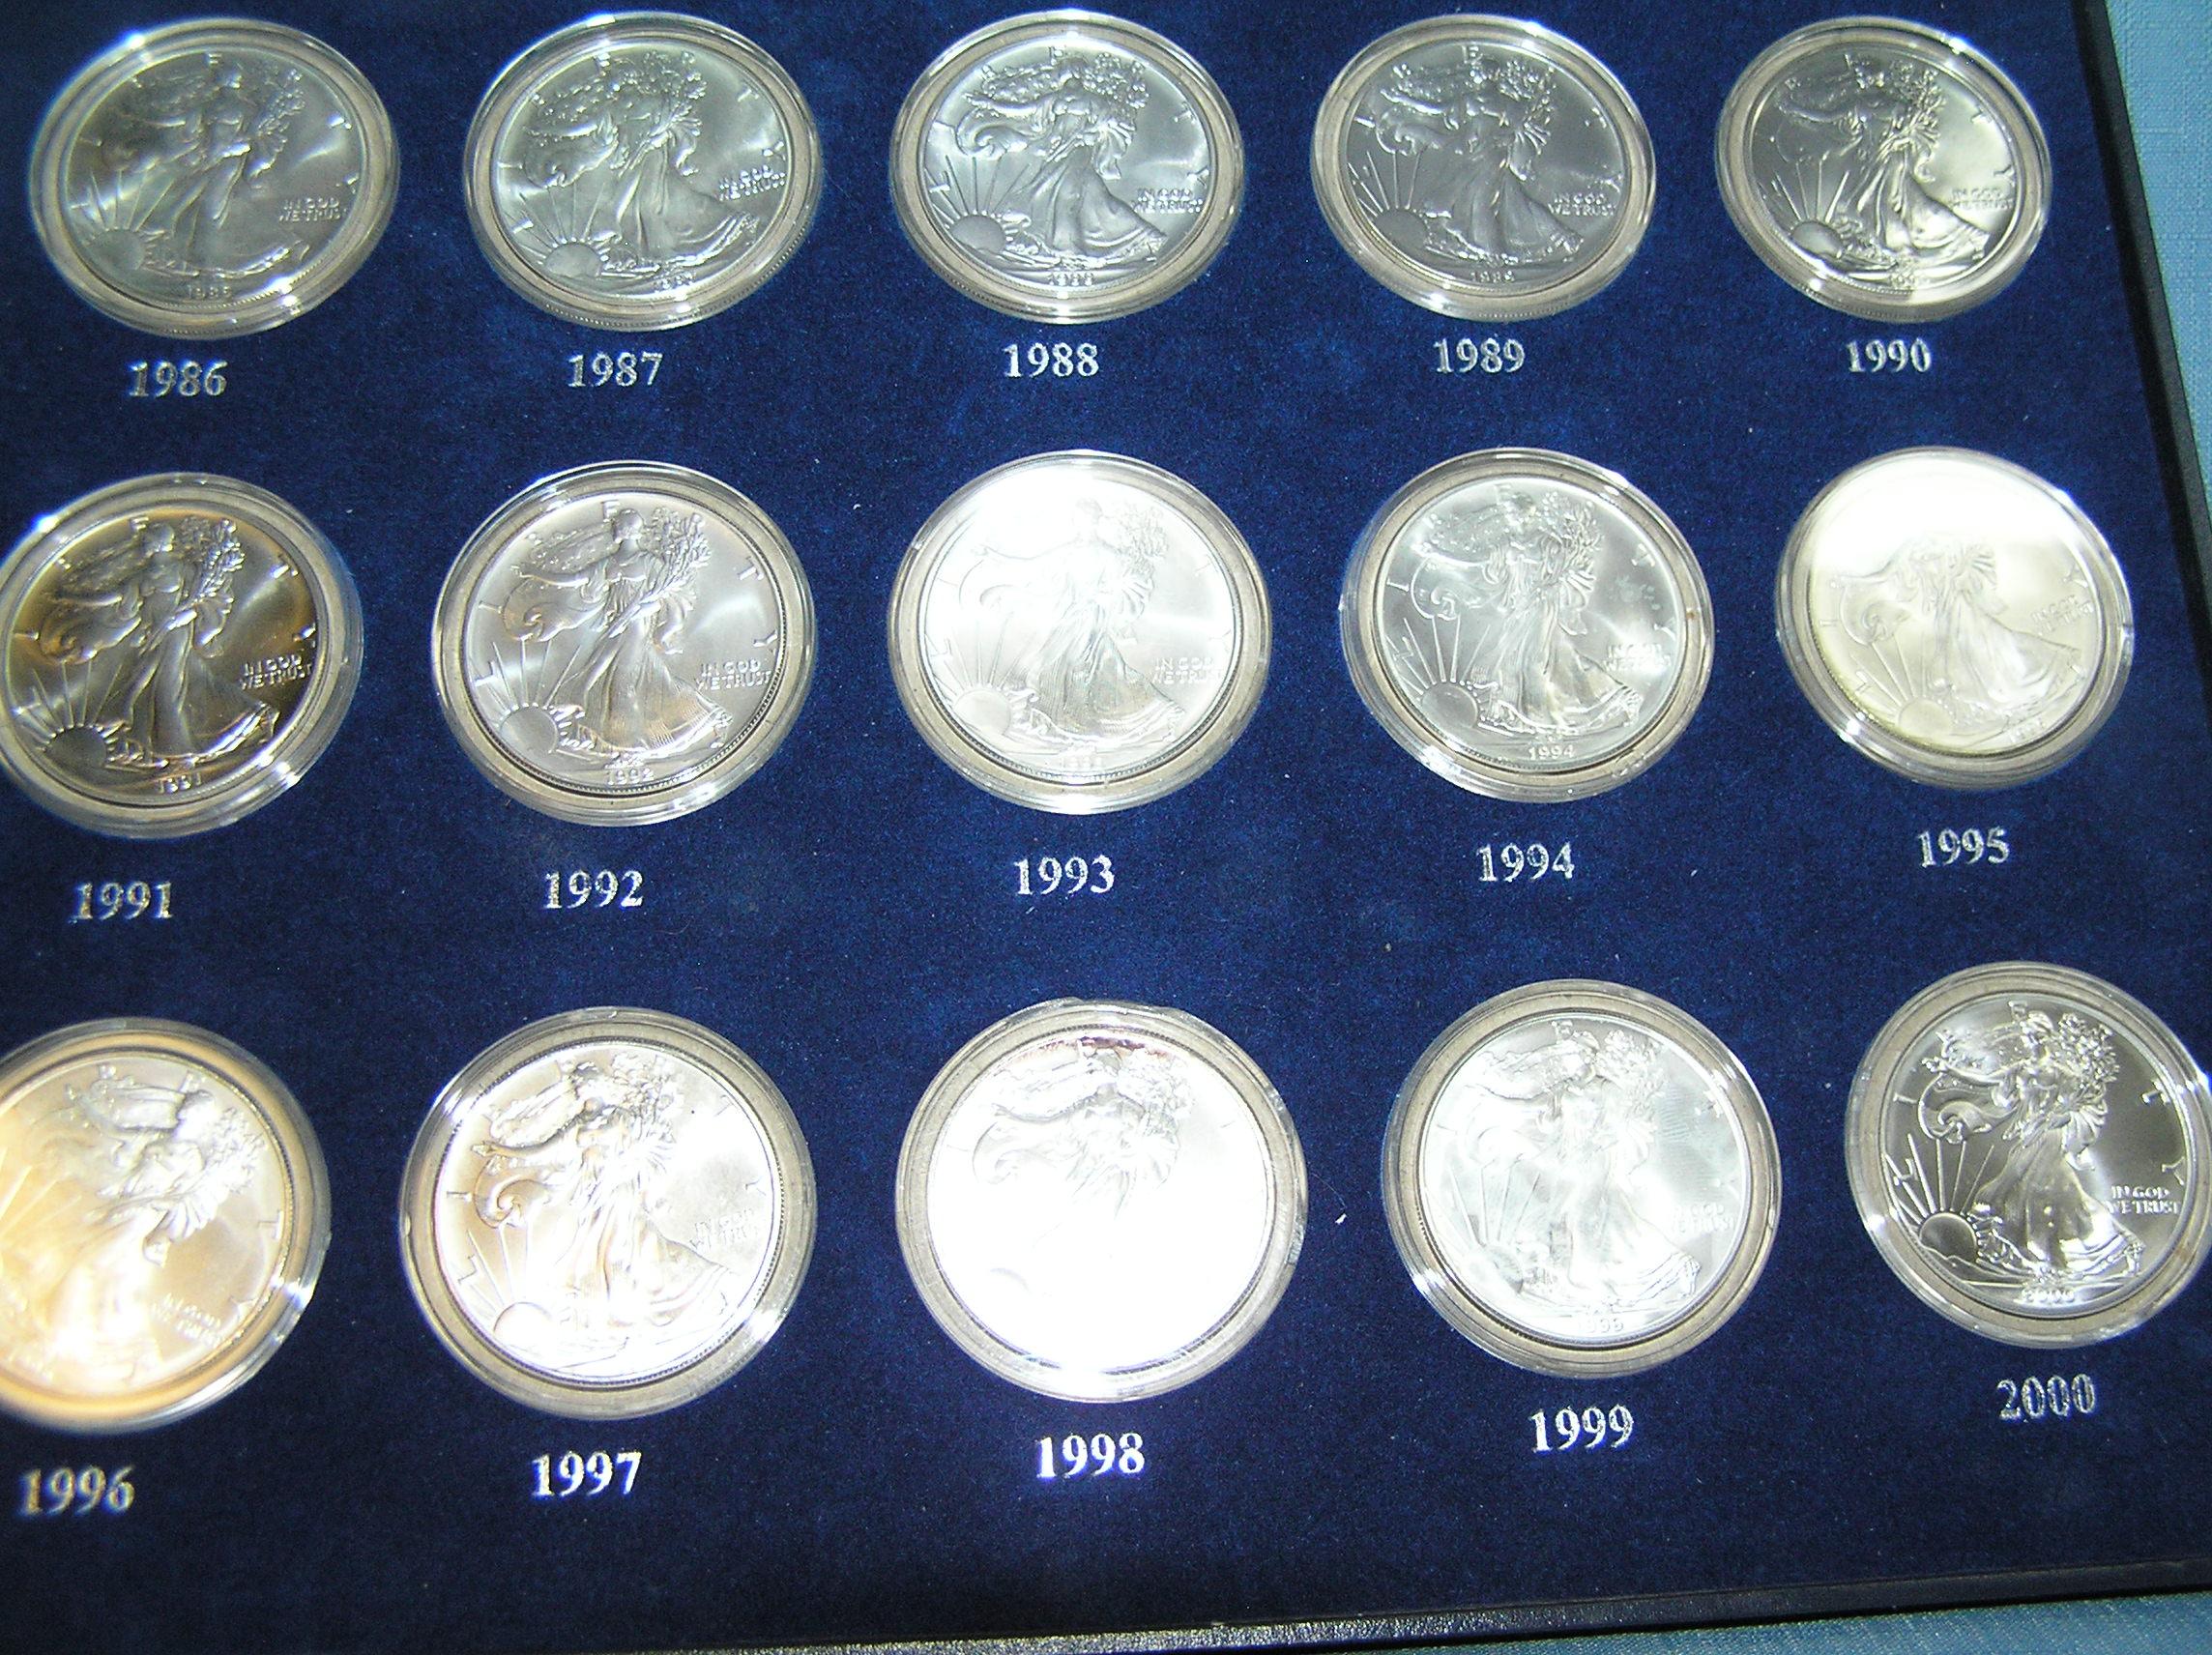 America's largest American silver dollar collection